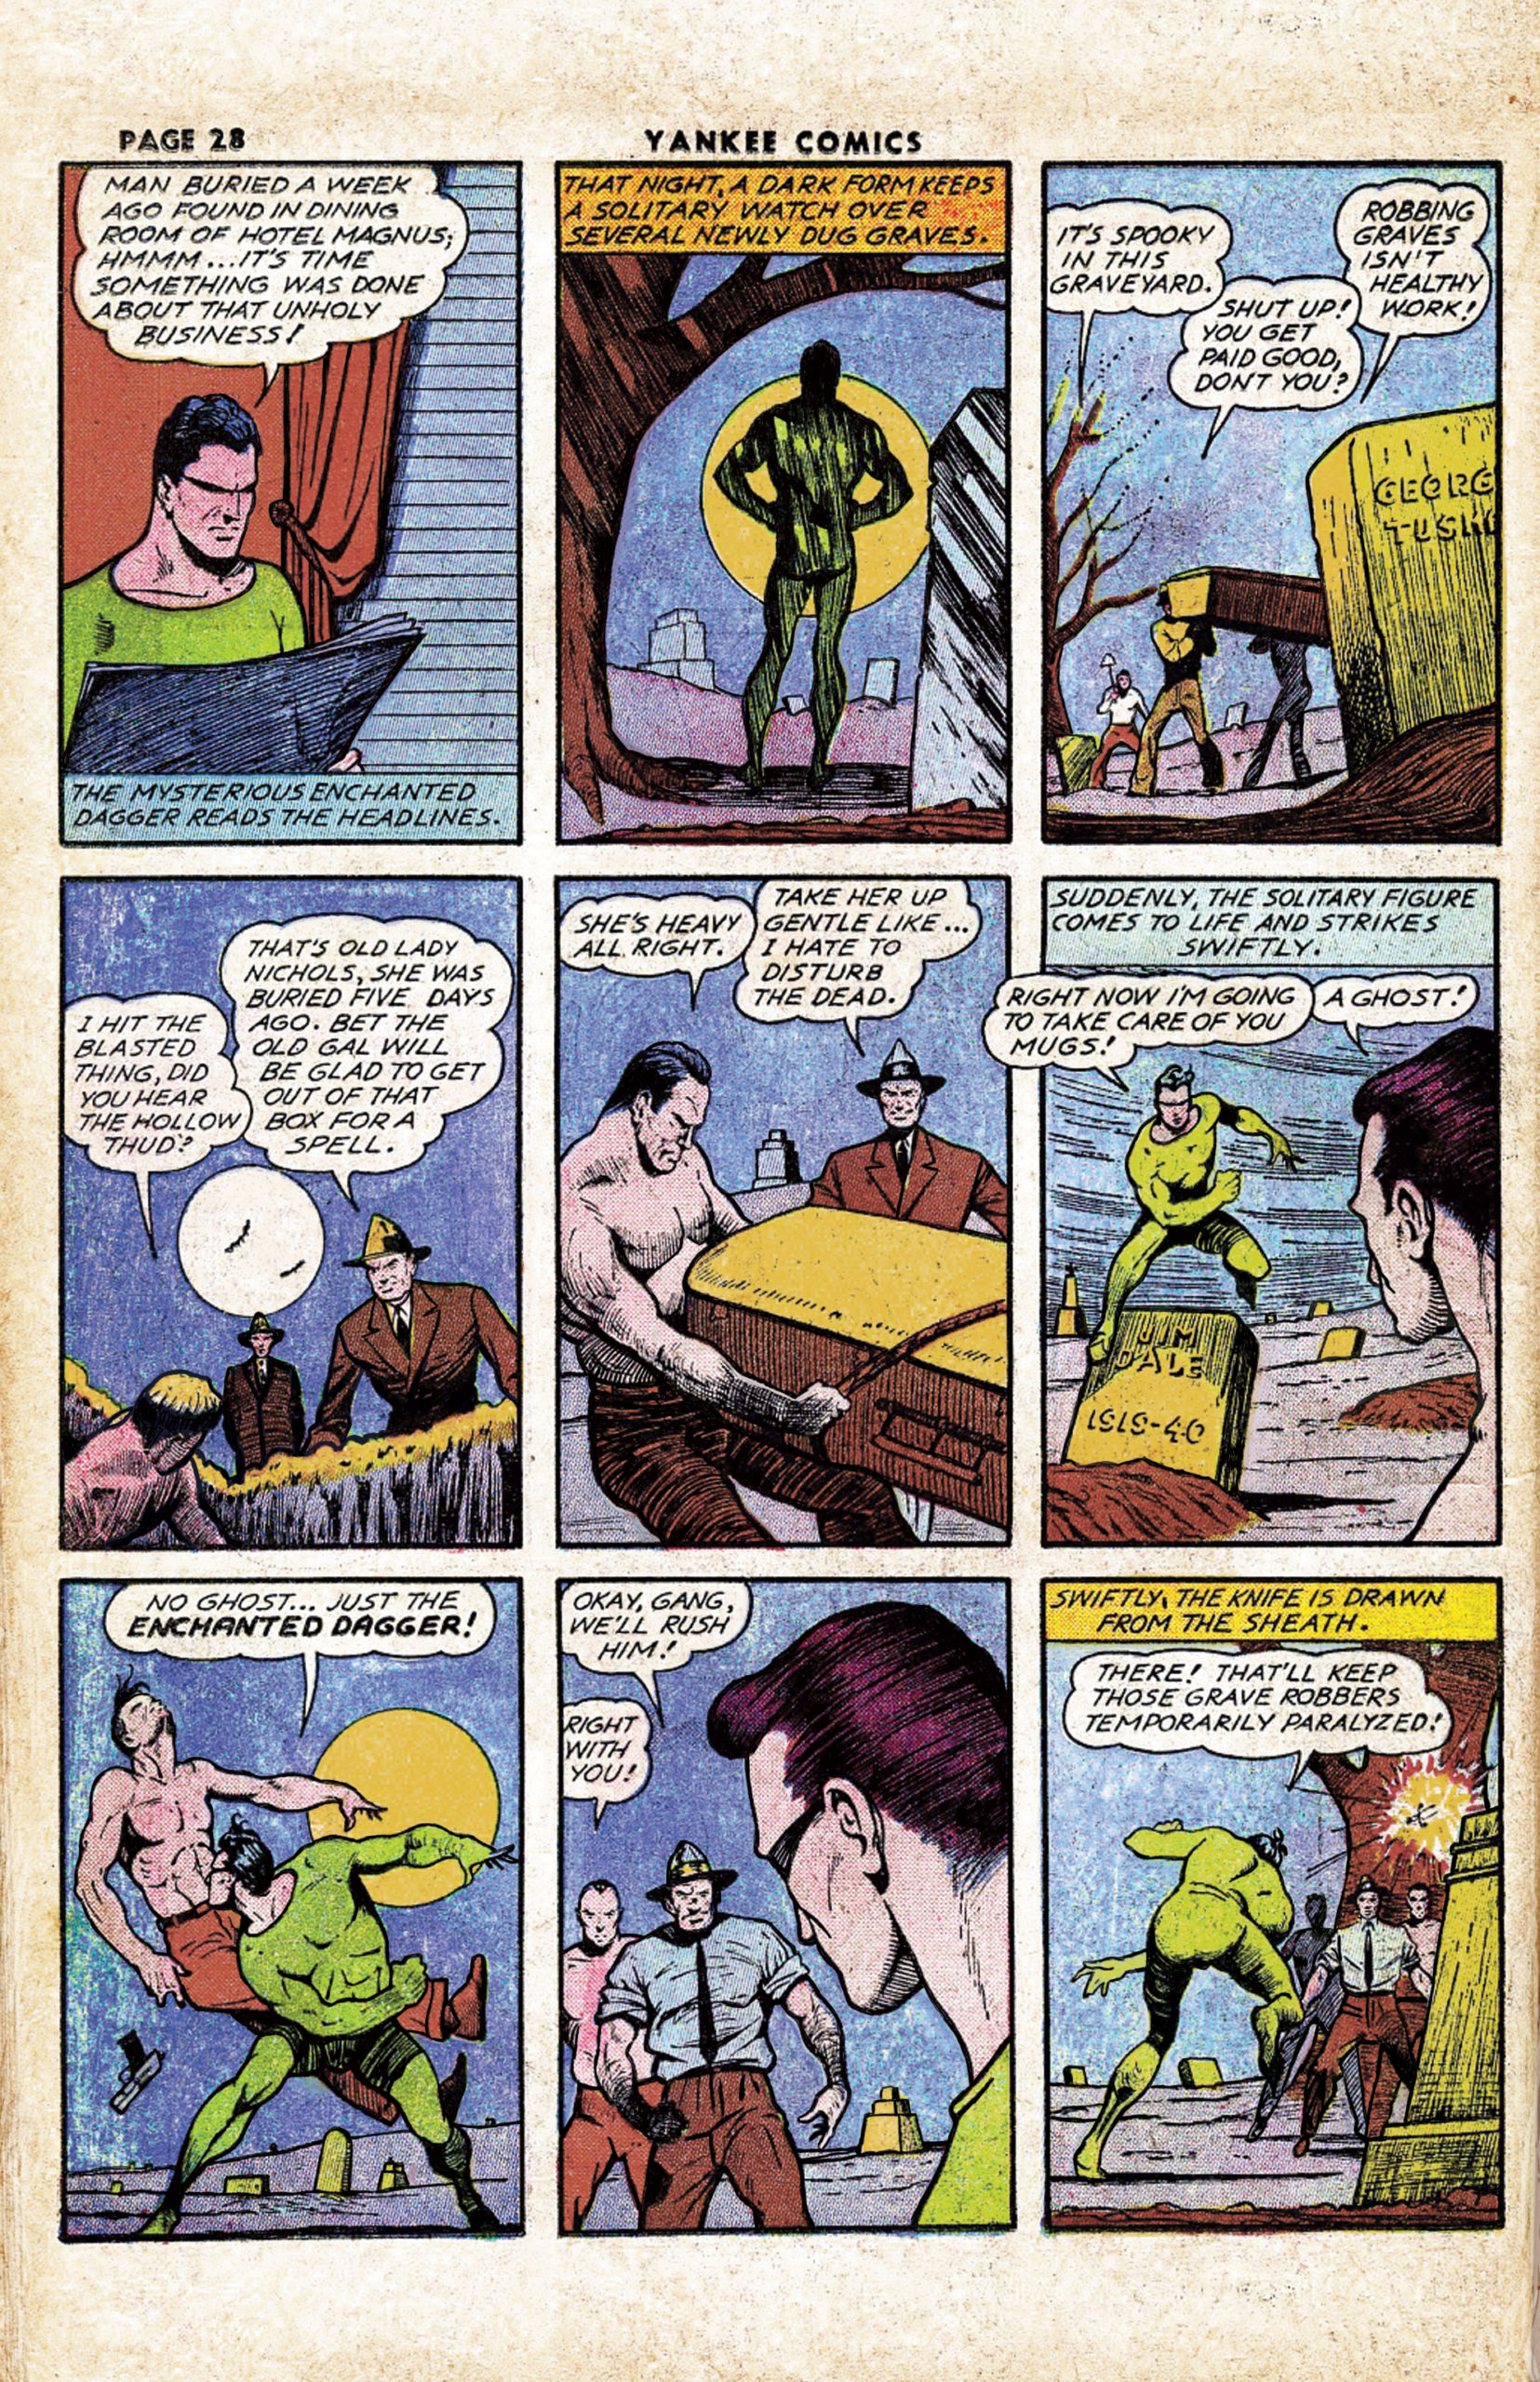 The Enchanted Dagger #5 – Page 19 (Classic Enchanted Dagger #3)